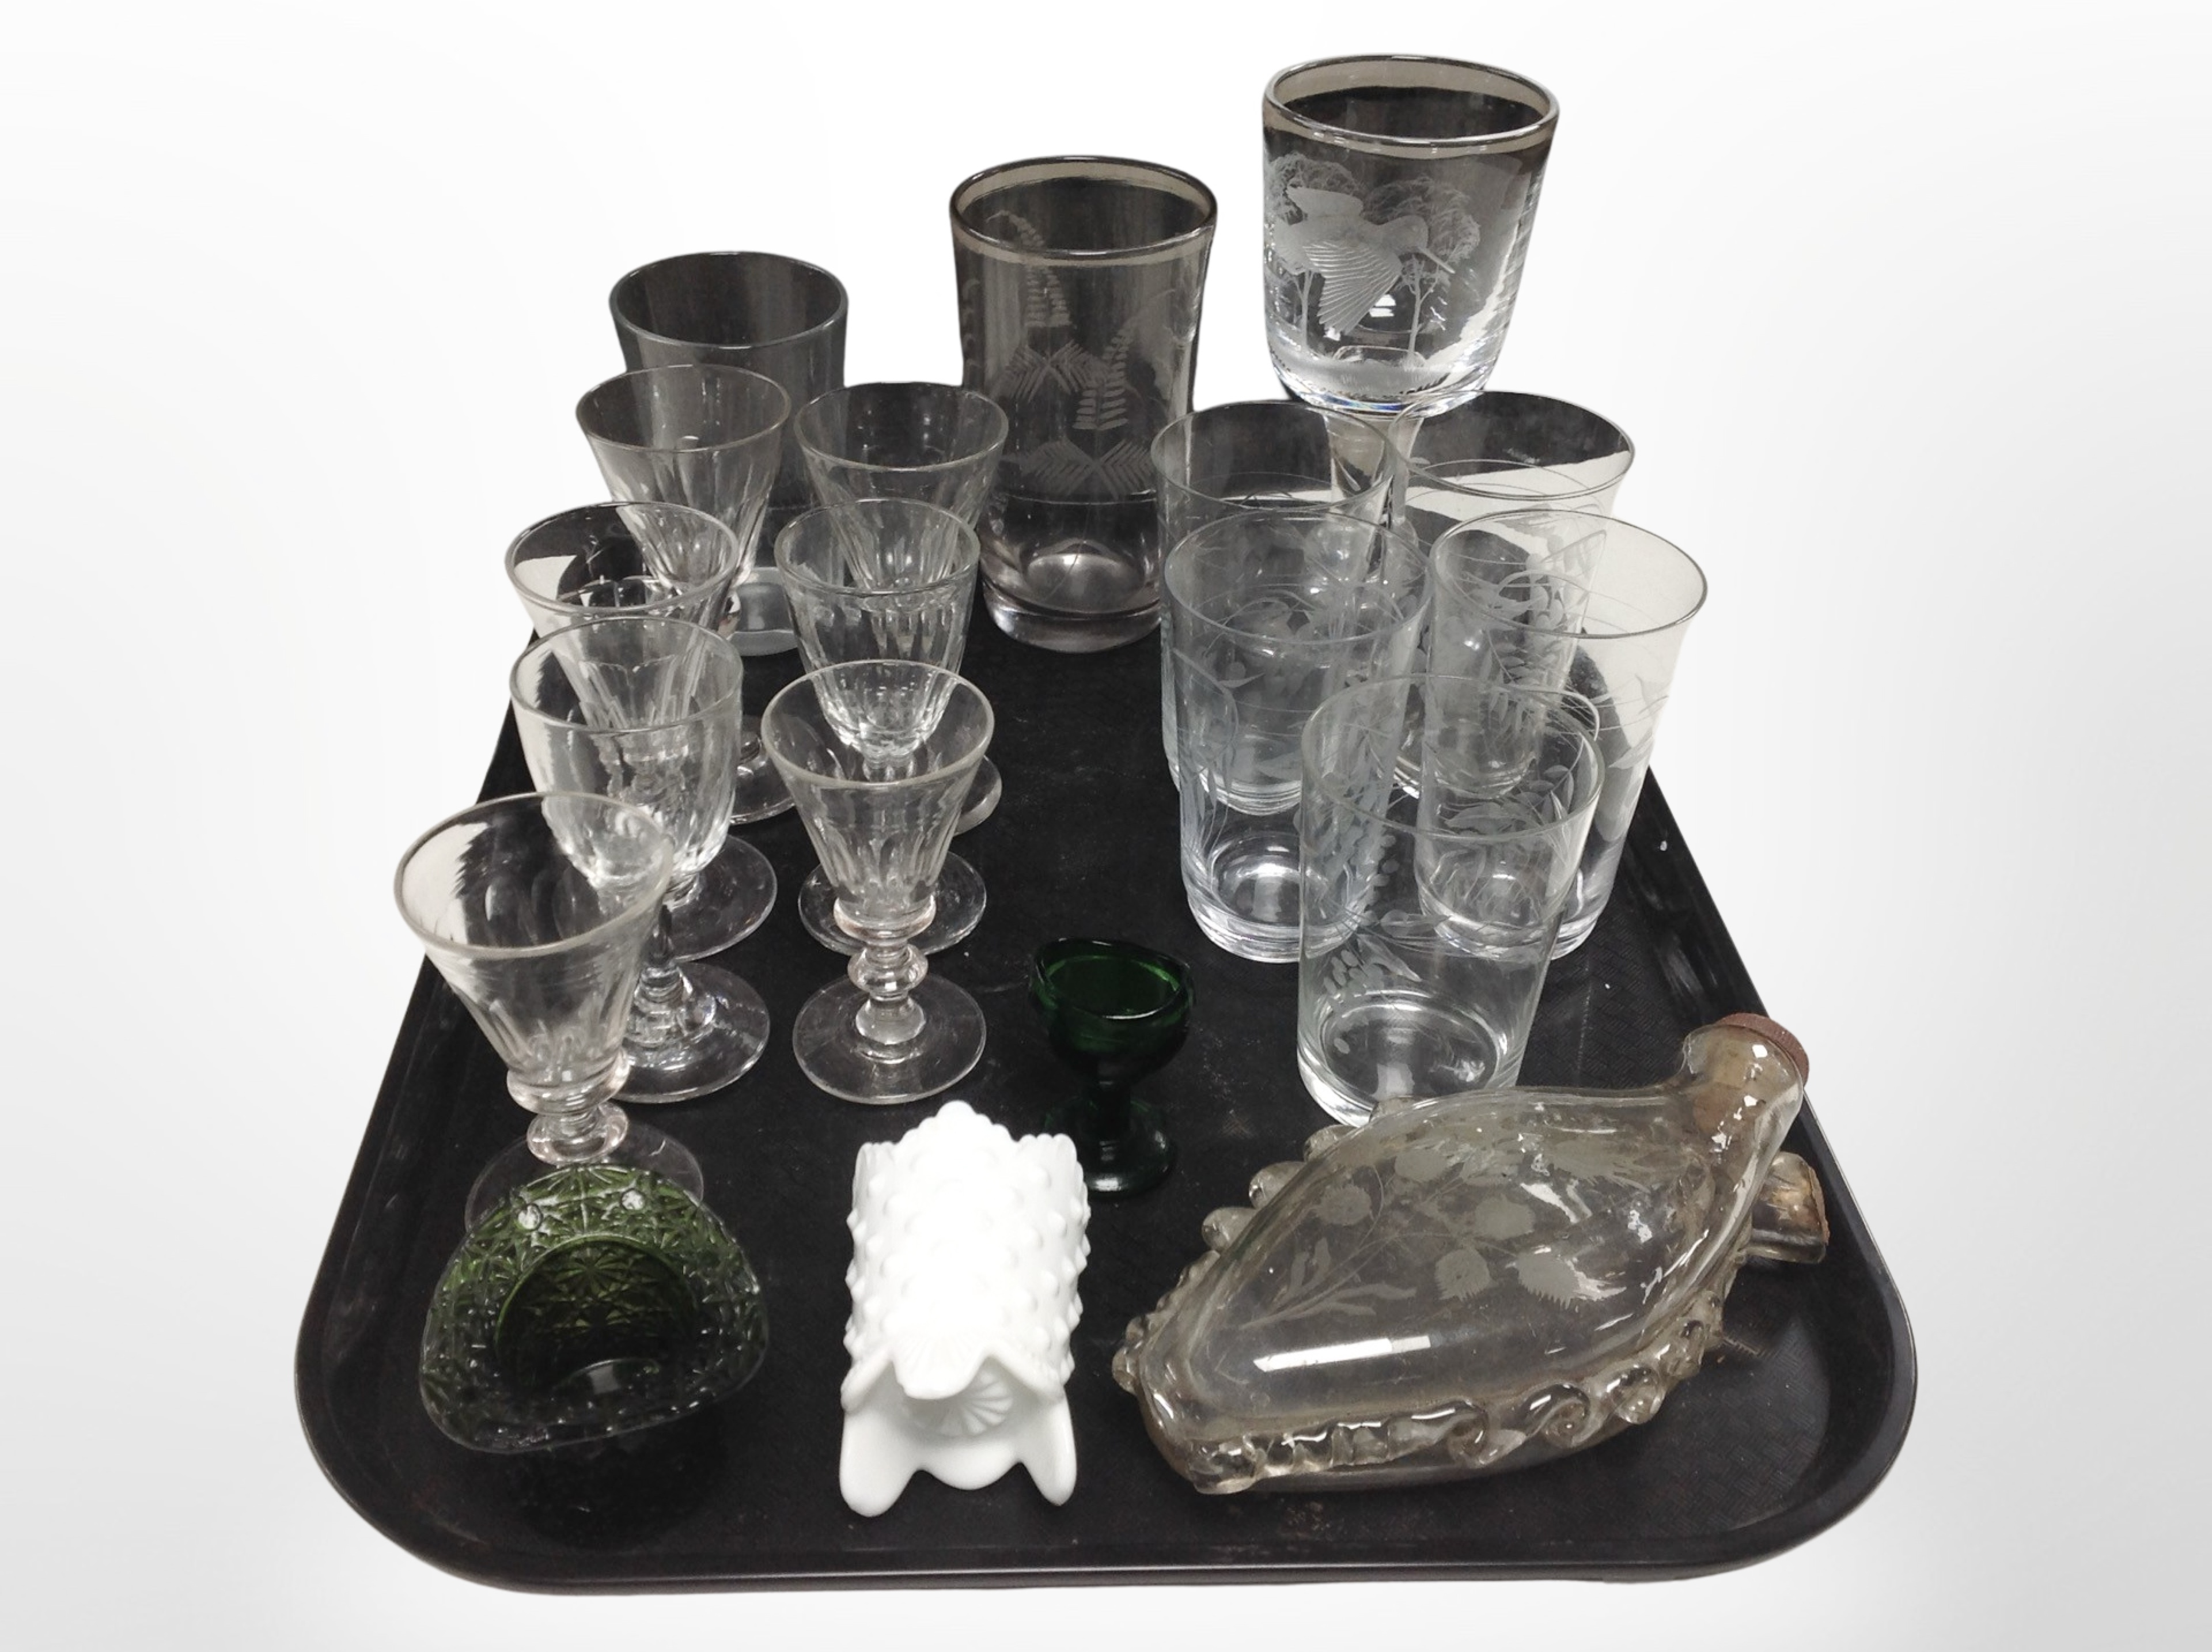 A group of 19th-century and later glassware including an etched crystal ale glass depicting a